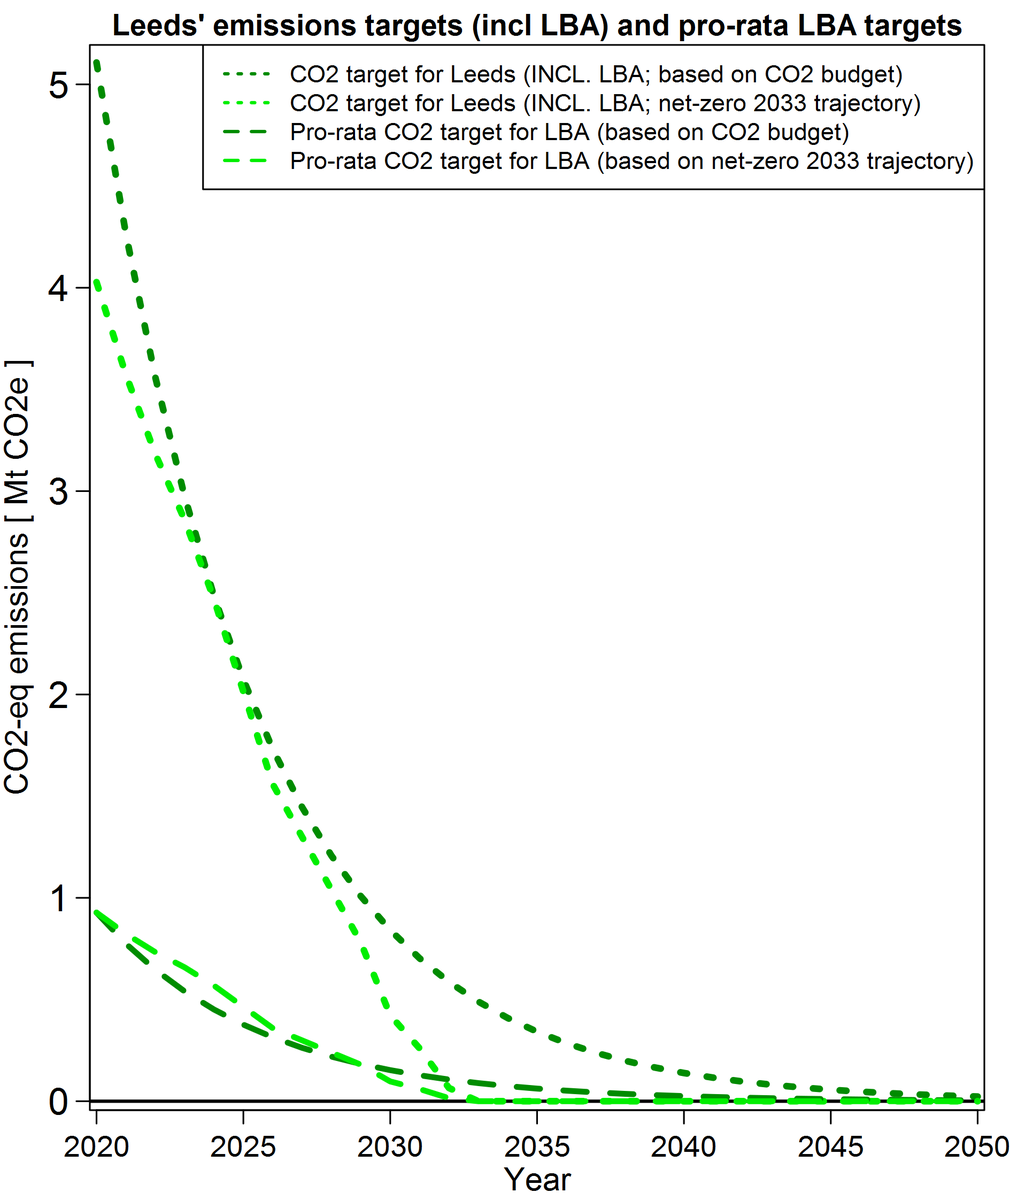 5/ We can derive a pro-rata CO2 target for LBA by allocating to LBA a fixed proportion of the annual CO2 target for Leeds incl. LBA, based on LBA’s current share in Leeds emissions (dark green / light green dashed curves, based on the respective dotted curves for Leeds incl. LBA)